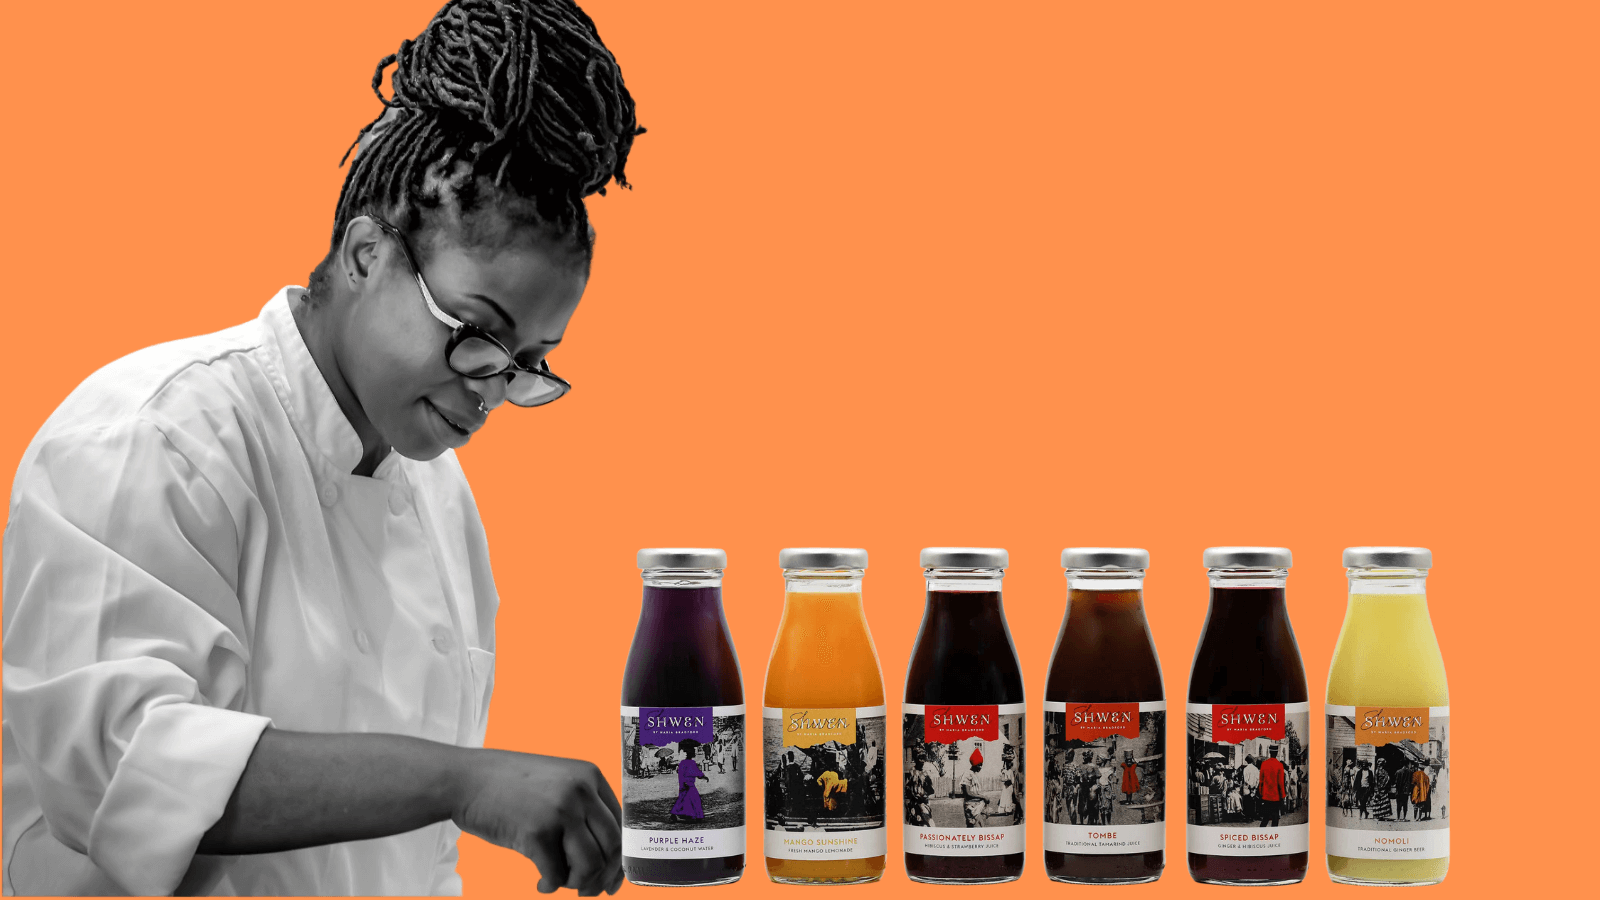 Maria Bradford launches juices inspired by taste of Sierra Leone